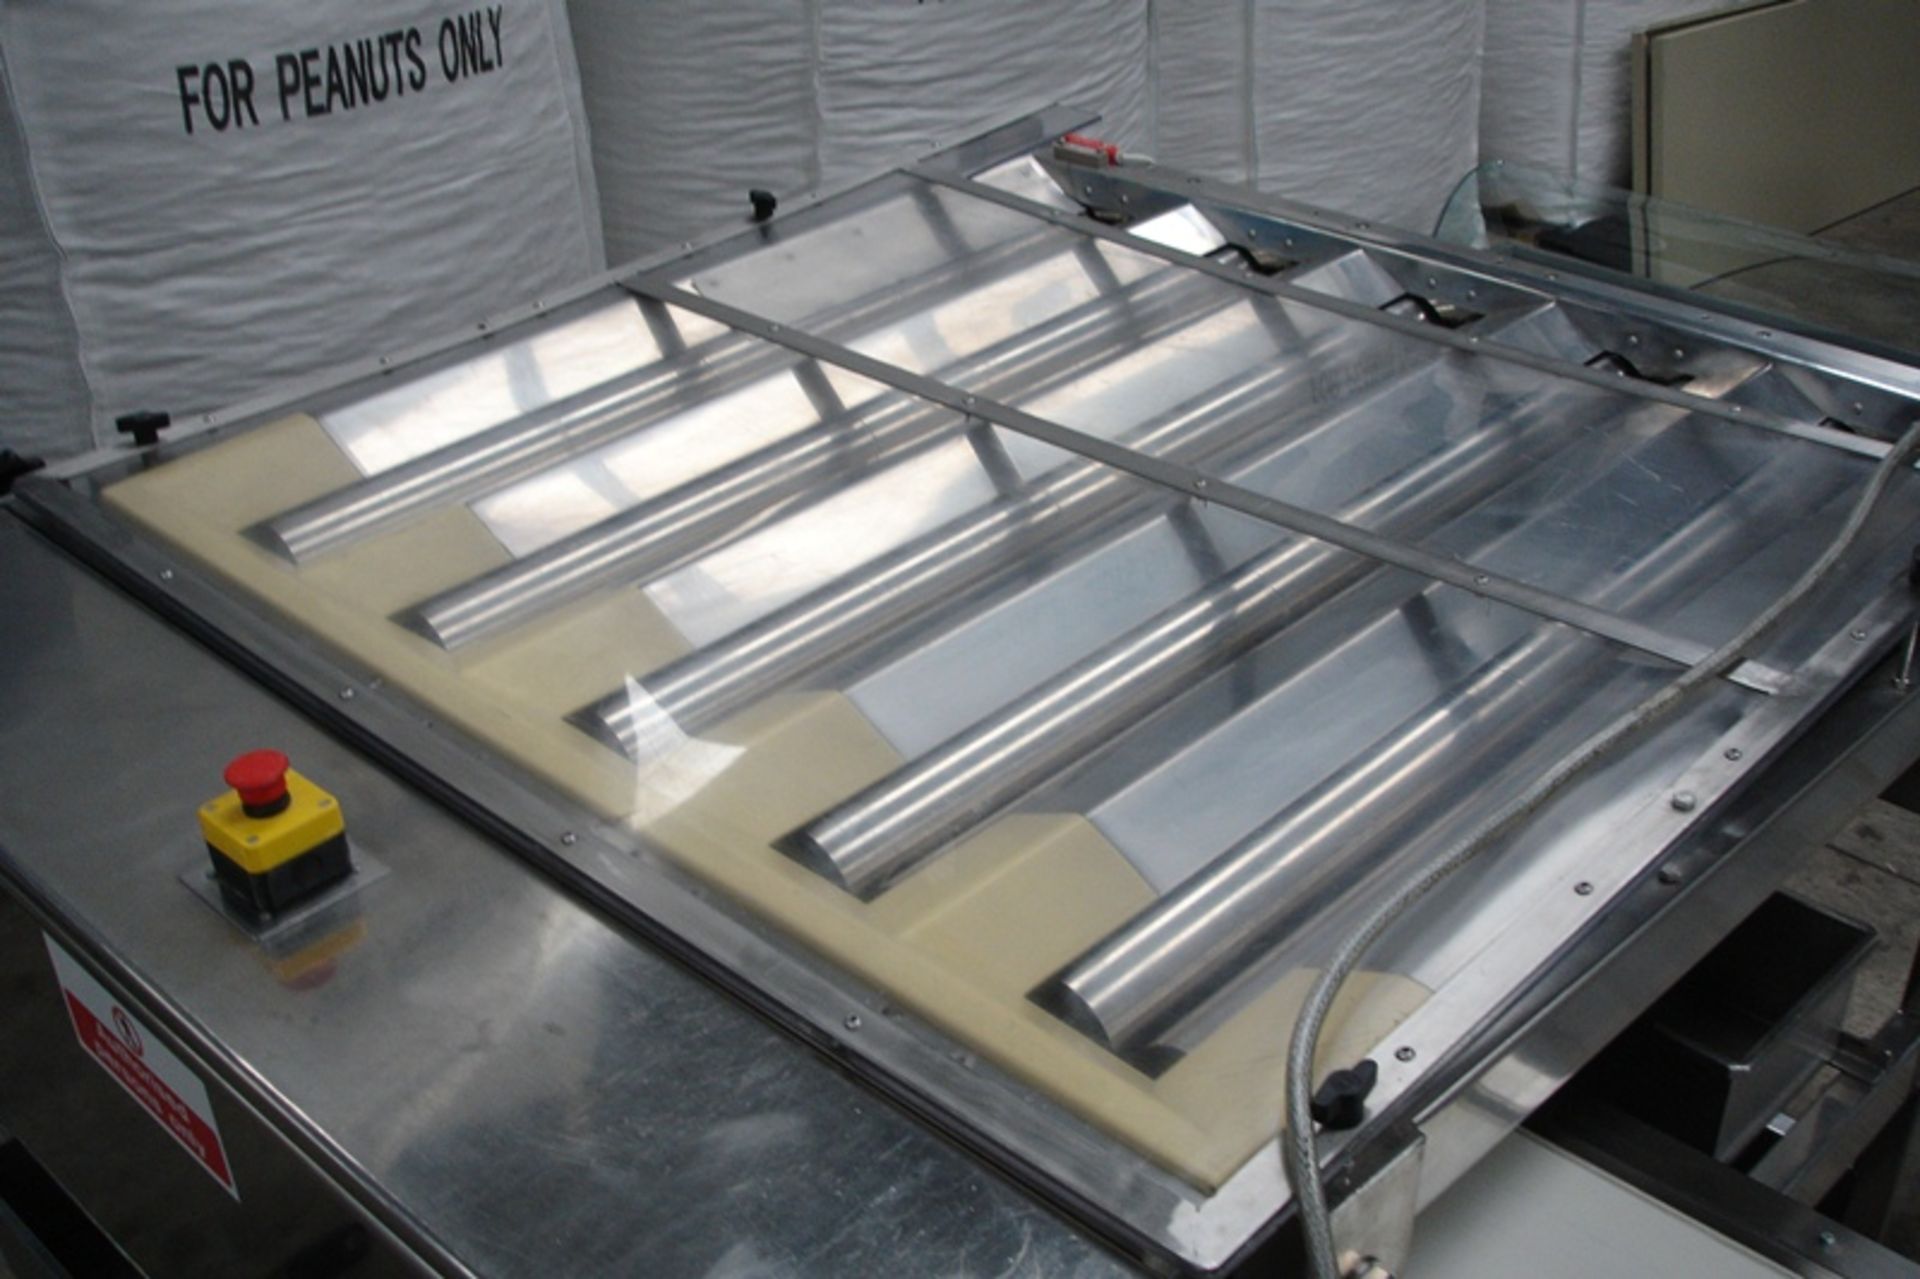 Fully S/S food grade 5 Lane Sizing / Grading Machine With Outfeed Conveyor - Image 2 of 7